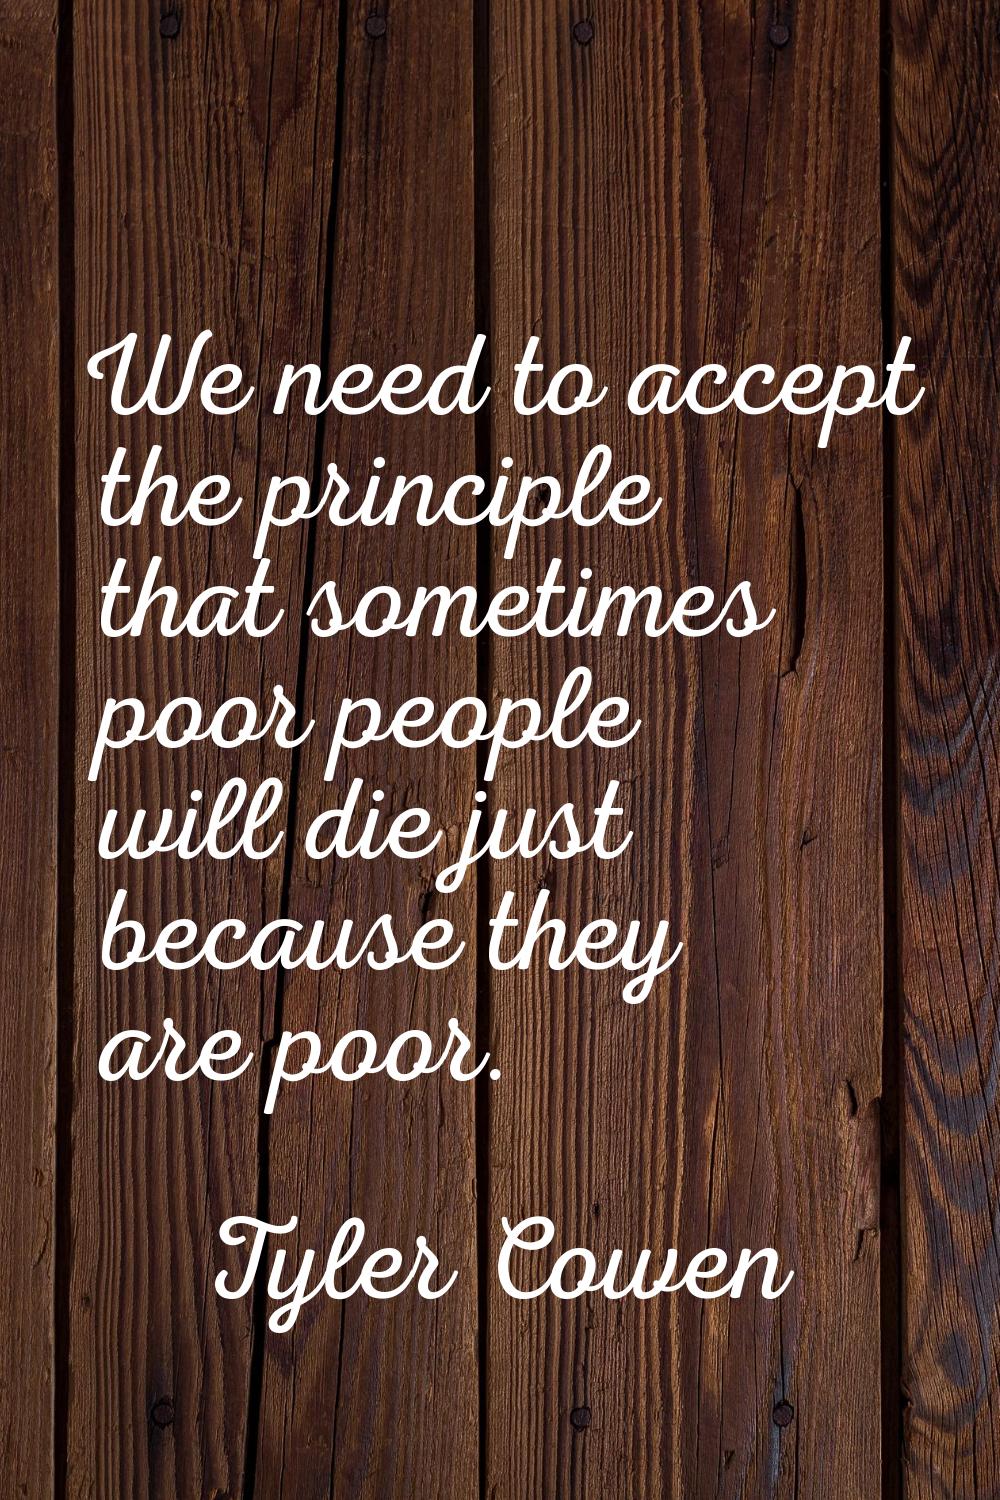 We need to accept the principle that sometimes poor people will die just because they are poor.